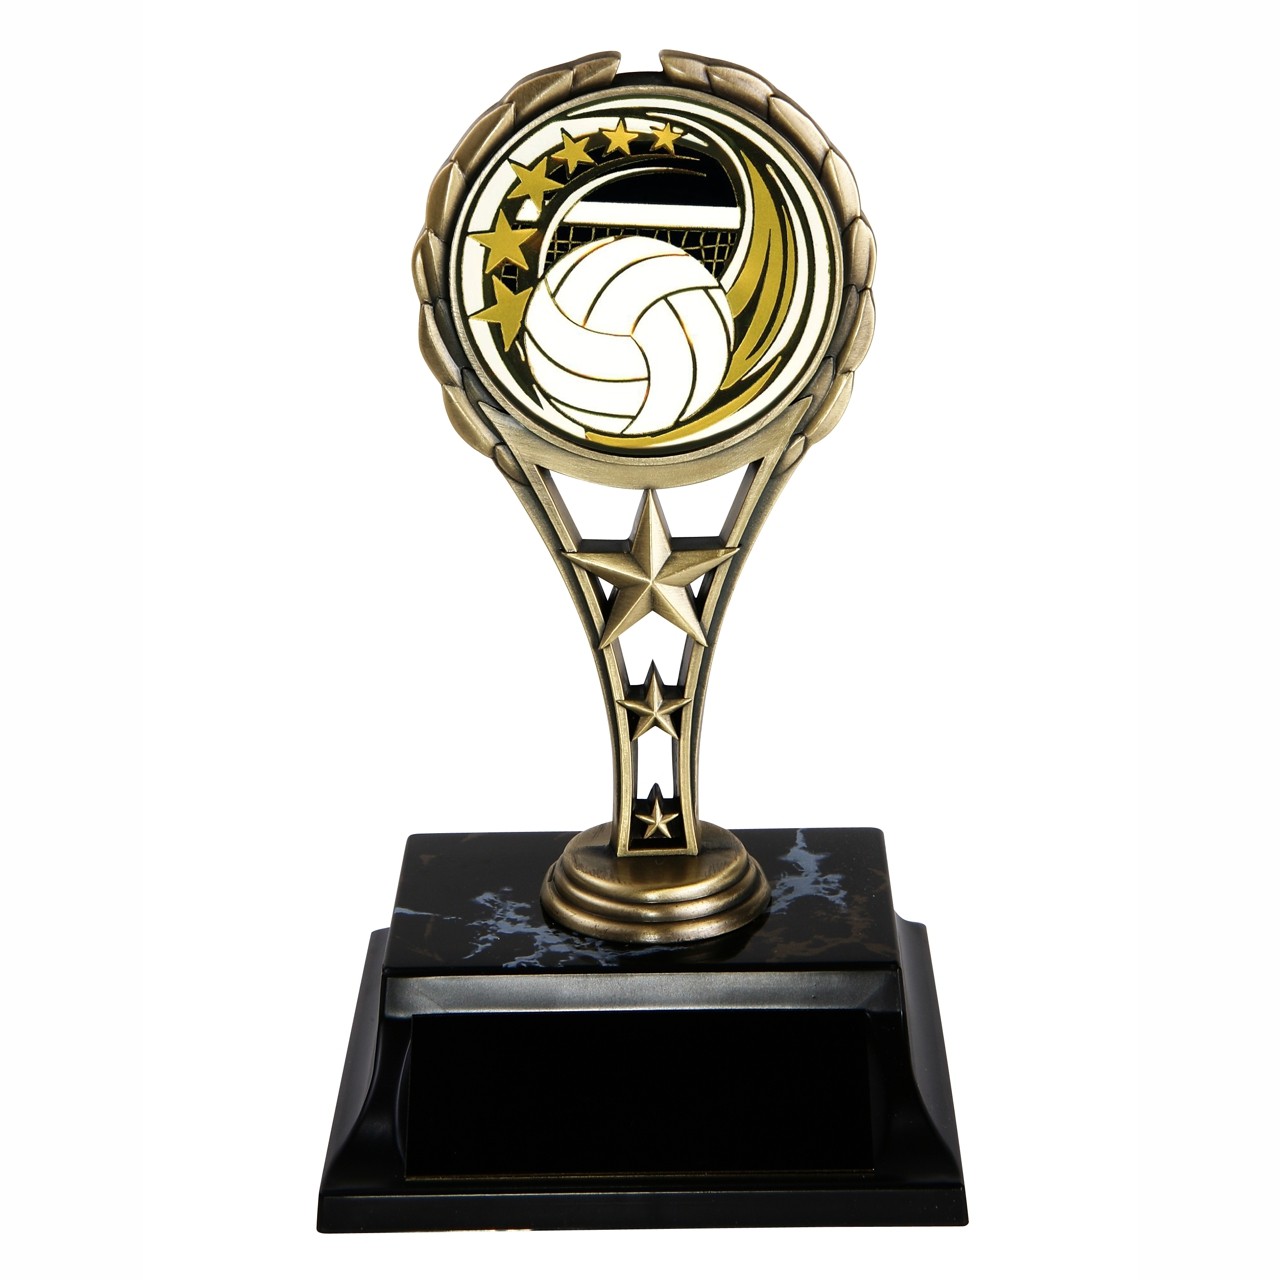 VOLLEYBALL METAL SPORT TROPHY 6.5"  ~~~ FREE ENGRAVING 